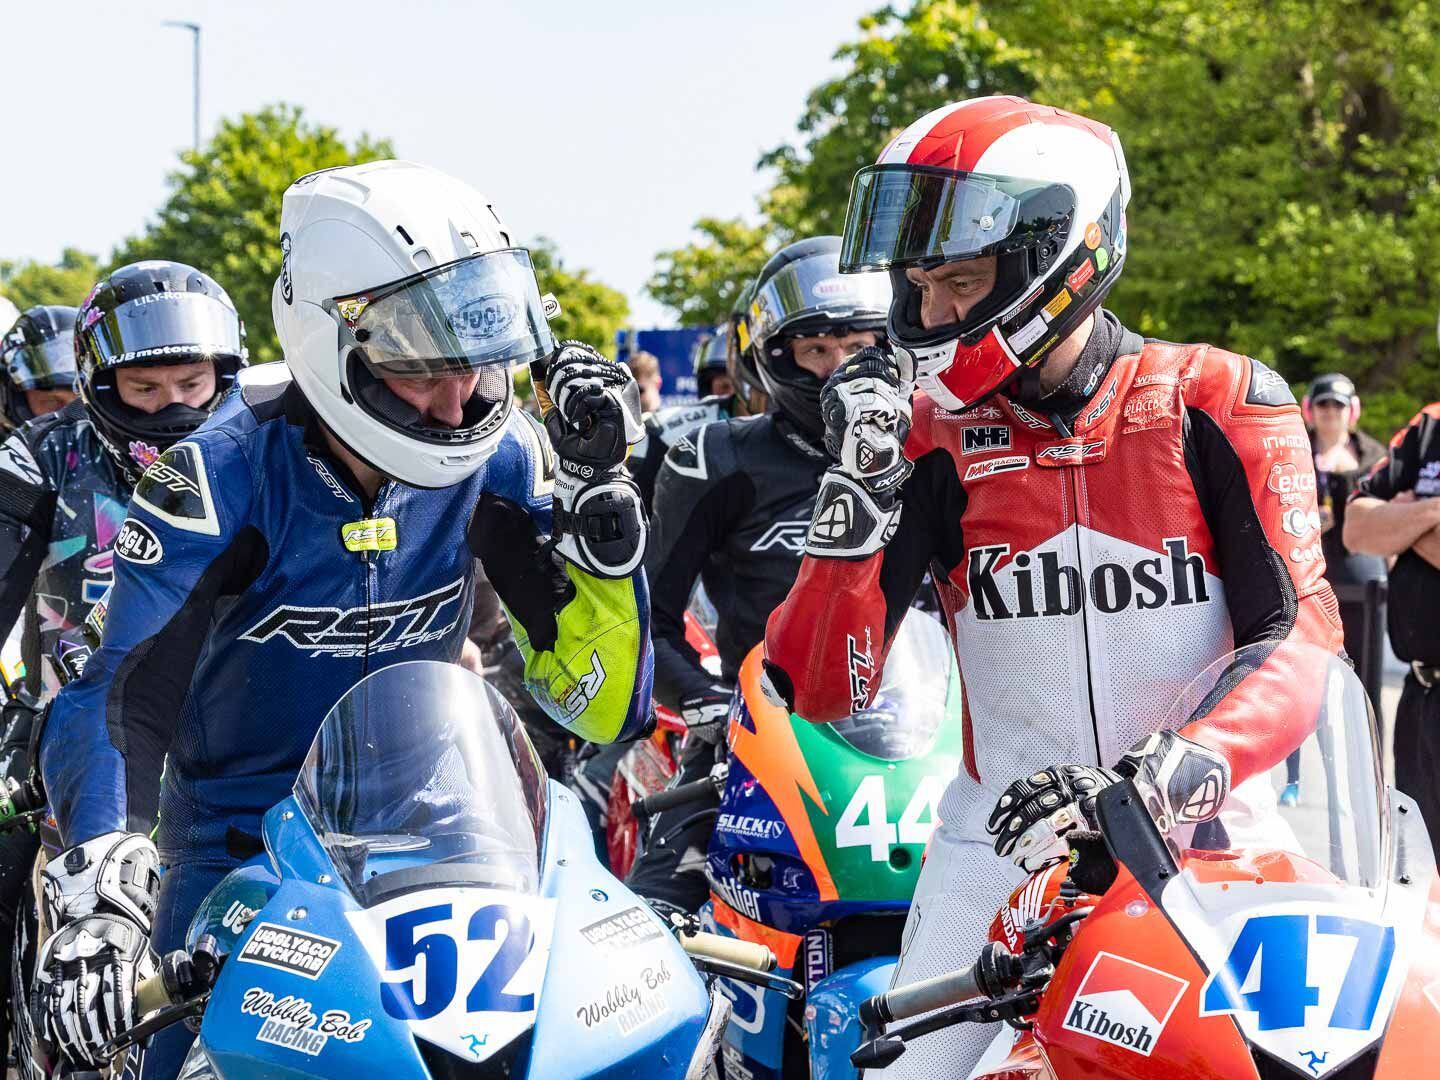 When you are lined up shoulder to shoulder, but the starter sends you off one at a time for practice, who goes first? Gary Vines (52) on his Honda CBR600RR and Richard Wilson (47) also on a Honda 600, rely on the universal decision-making process of Rock, Paper, Scissors. Of course, two out of three takes the lead position.